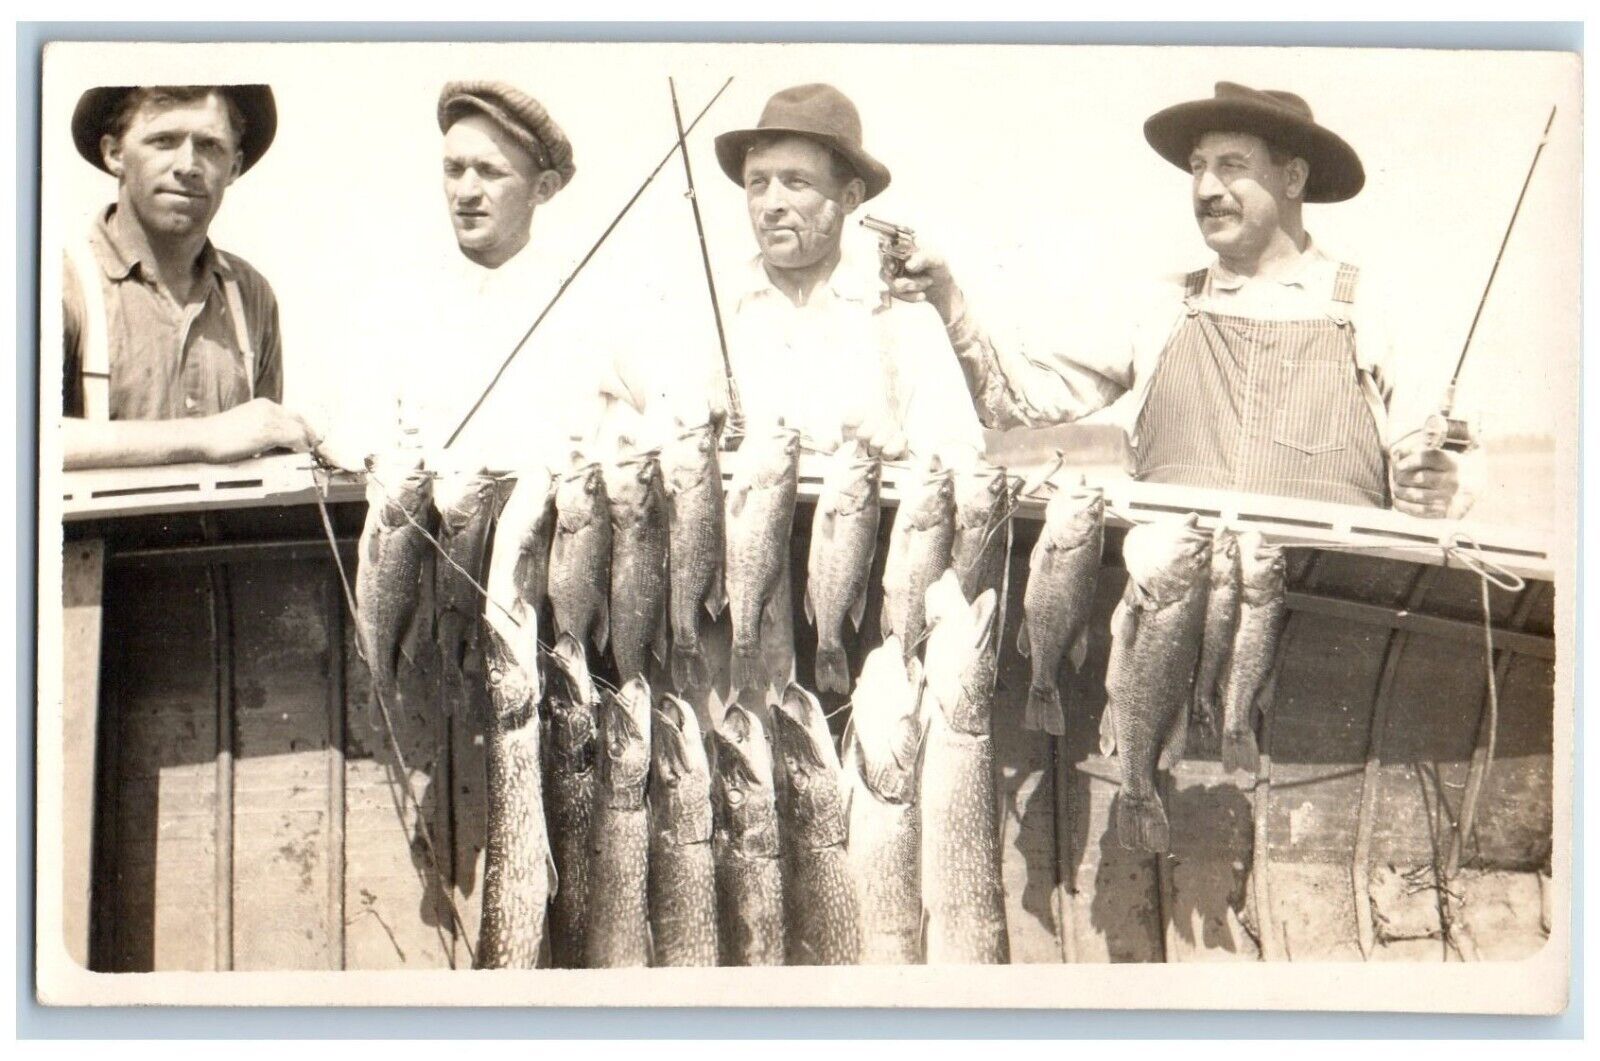 Fishing Mysterious Postcard RPPC Photo Man With Gun Pistol Weird Fishes c1910's